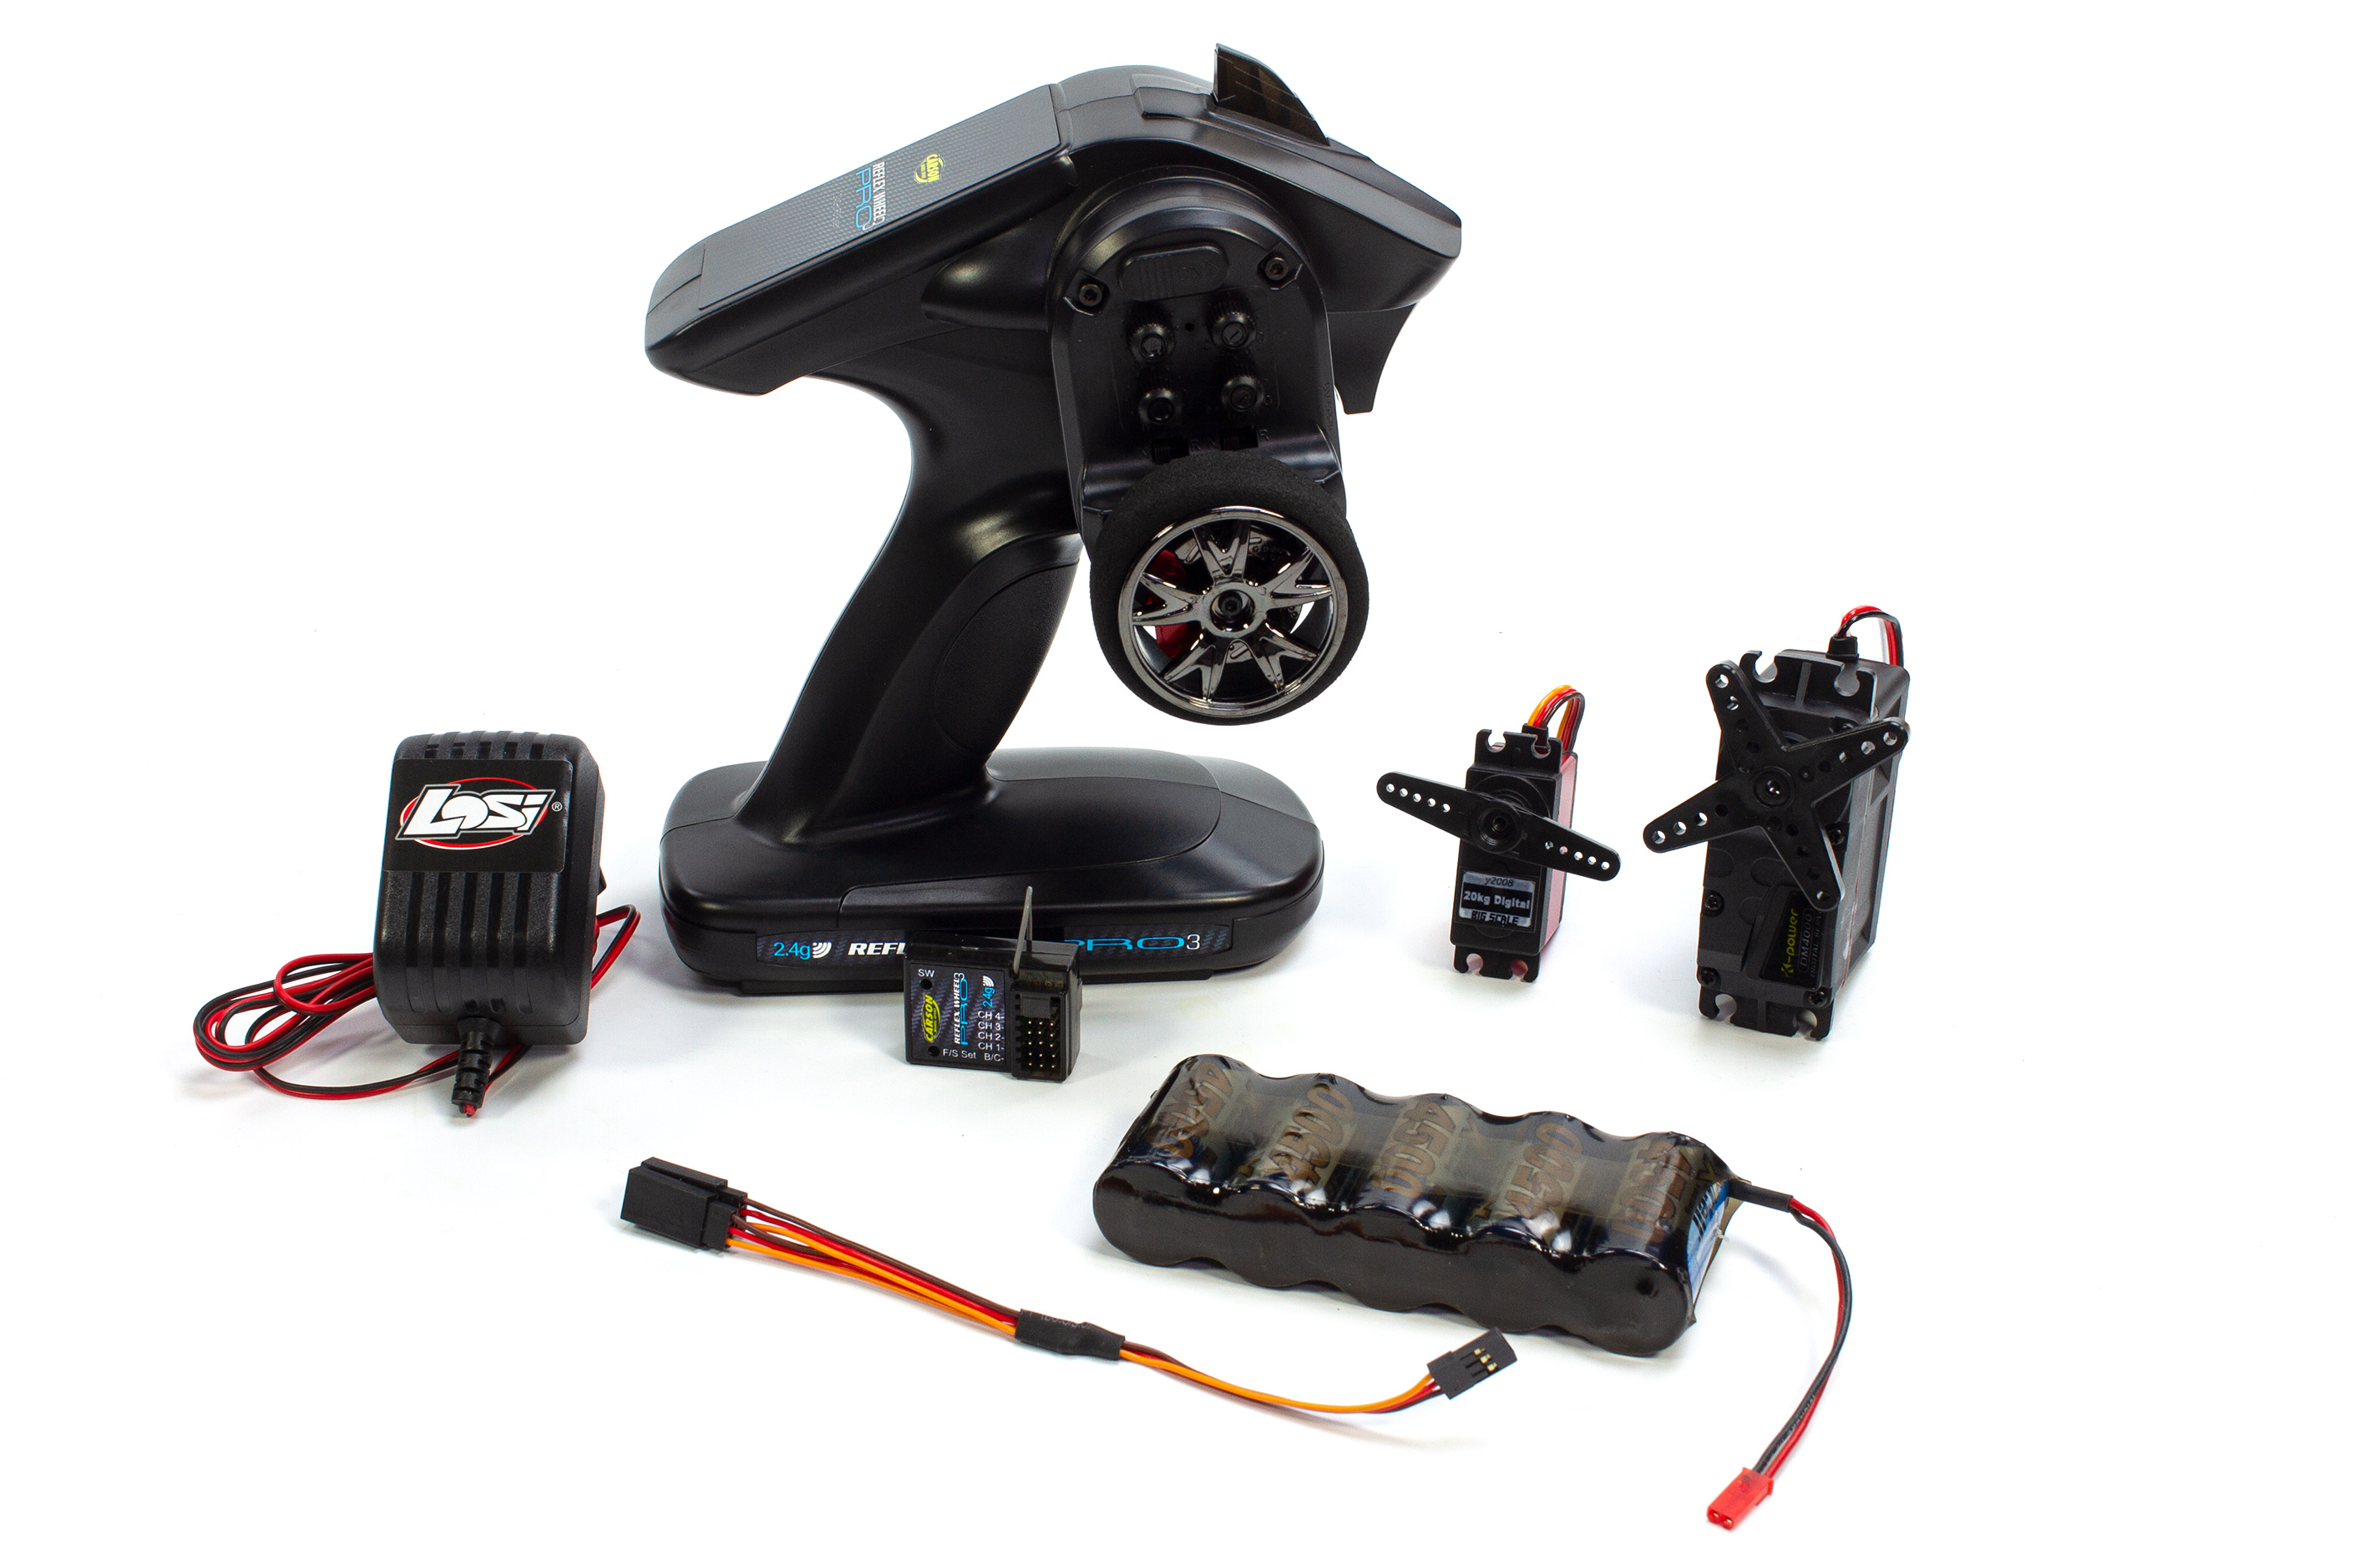 y0688 HT RTR set with 2,4 GHz radio control for all FG and Carson 1/6 models